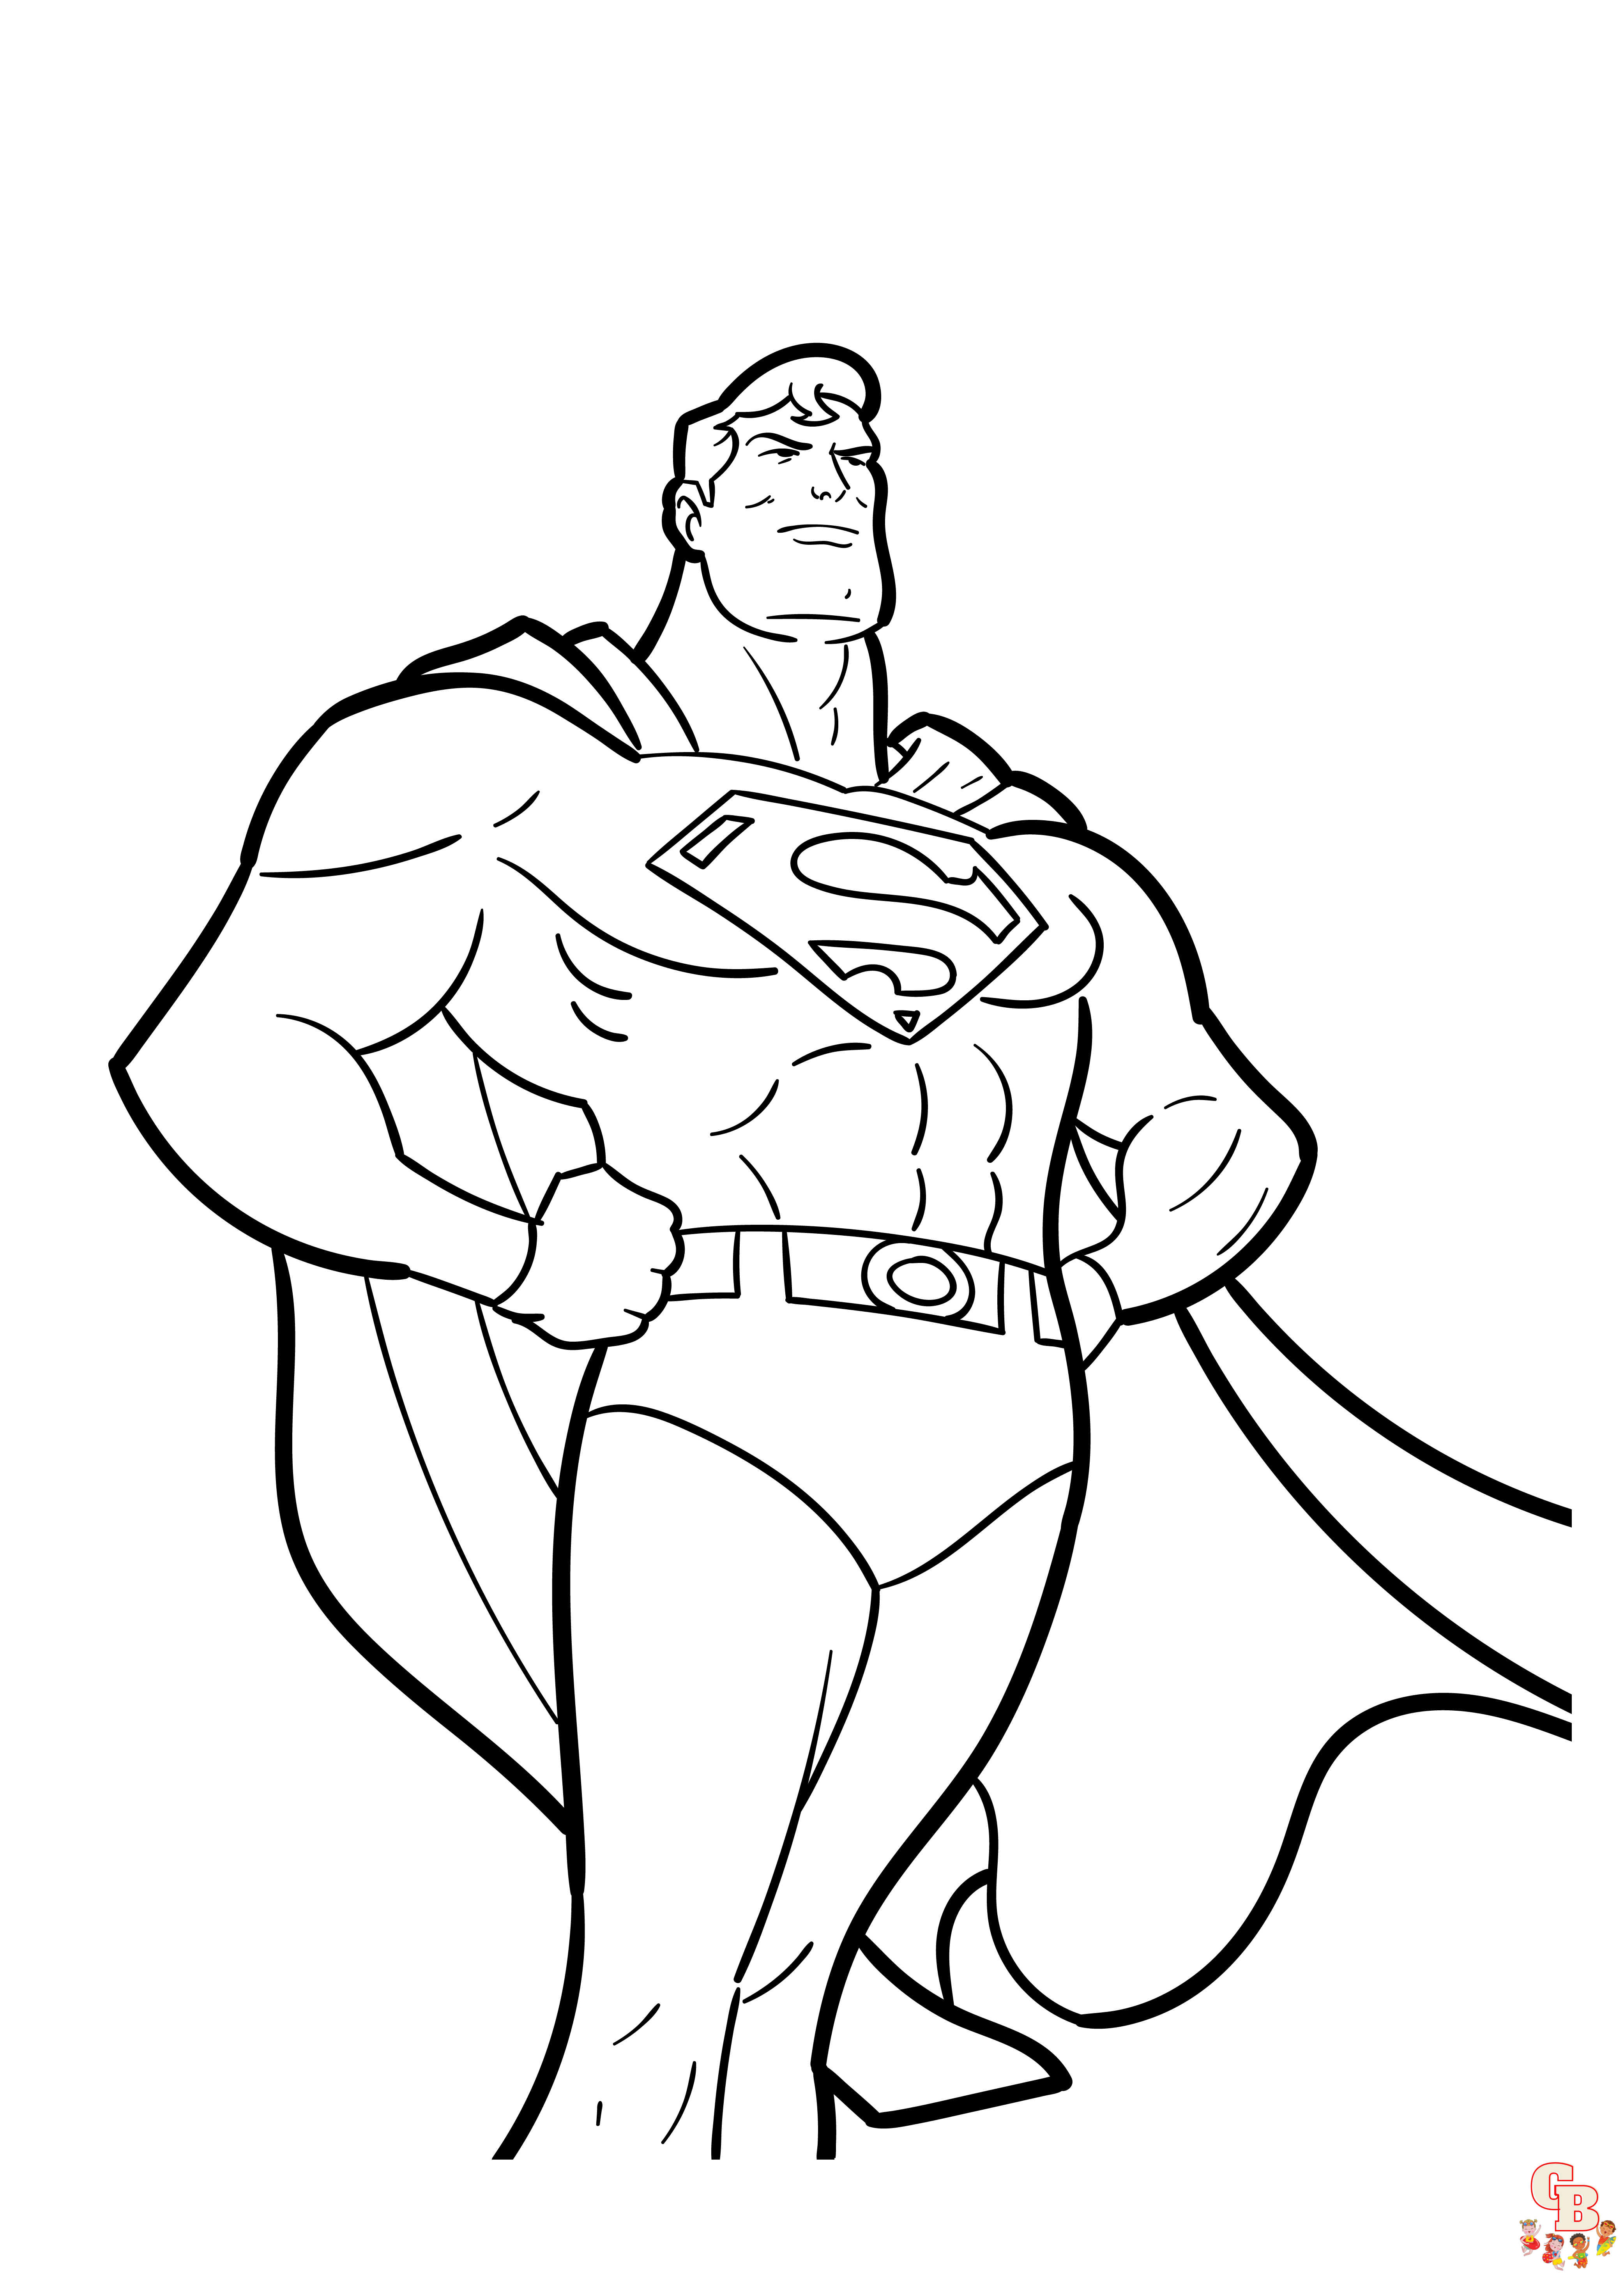 Get creative with free printable superman coloring pages